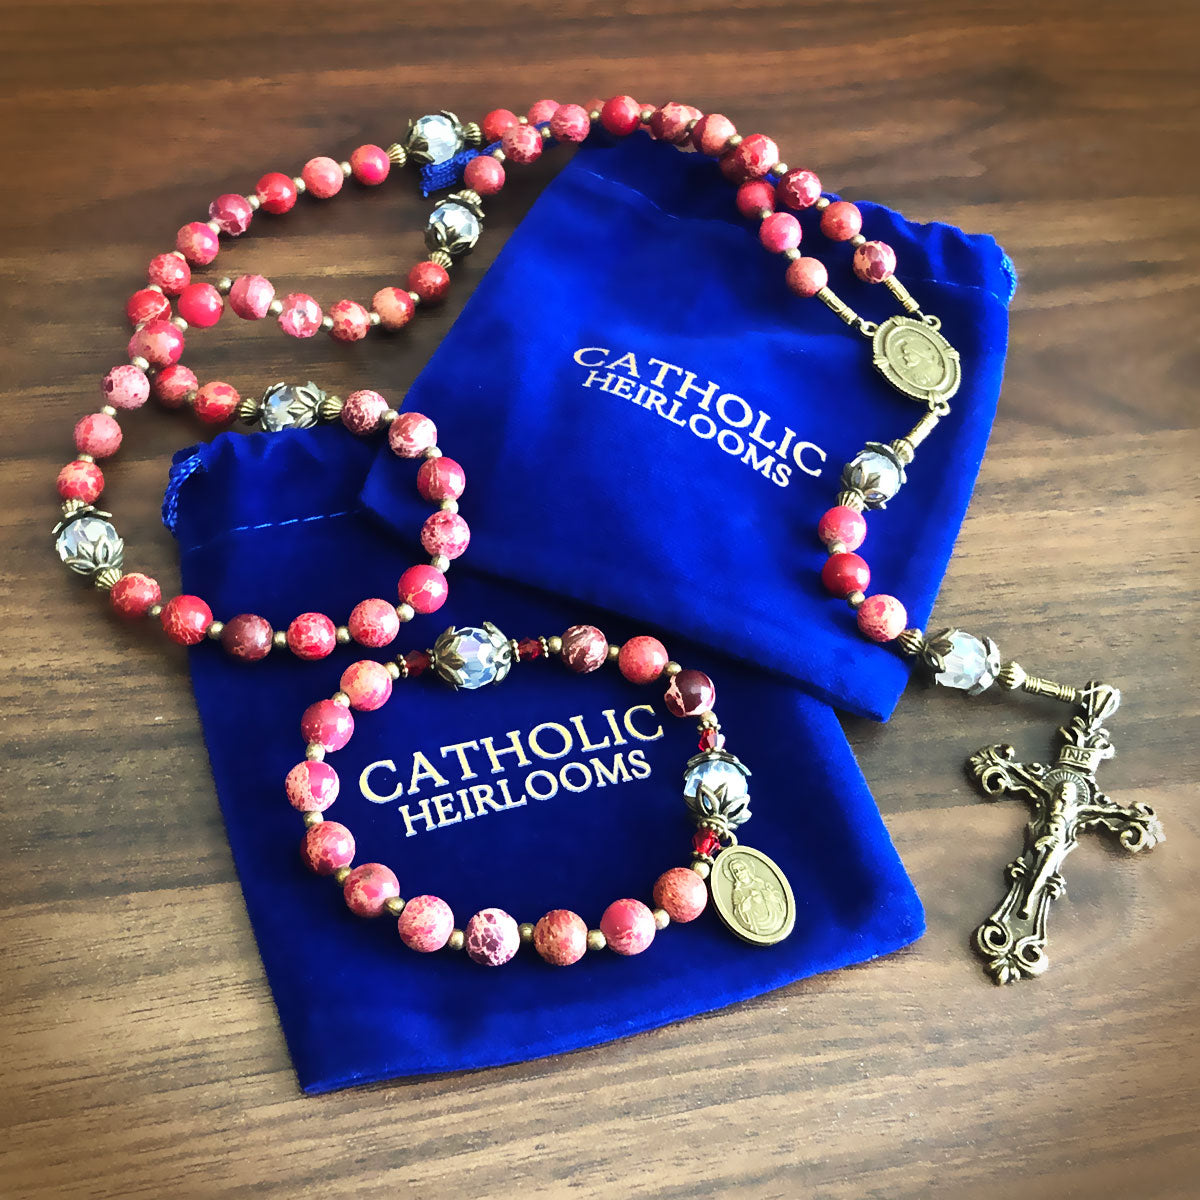 Sacred Heart of Jesus Stone and Crystal Rosary and Bracelet Deluxe Boxed Set by Catholic Heirlooms